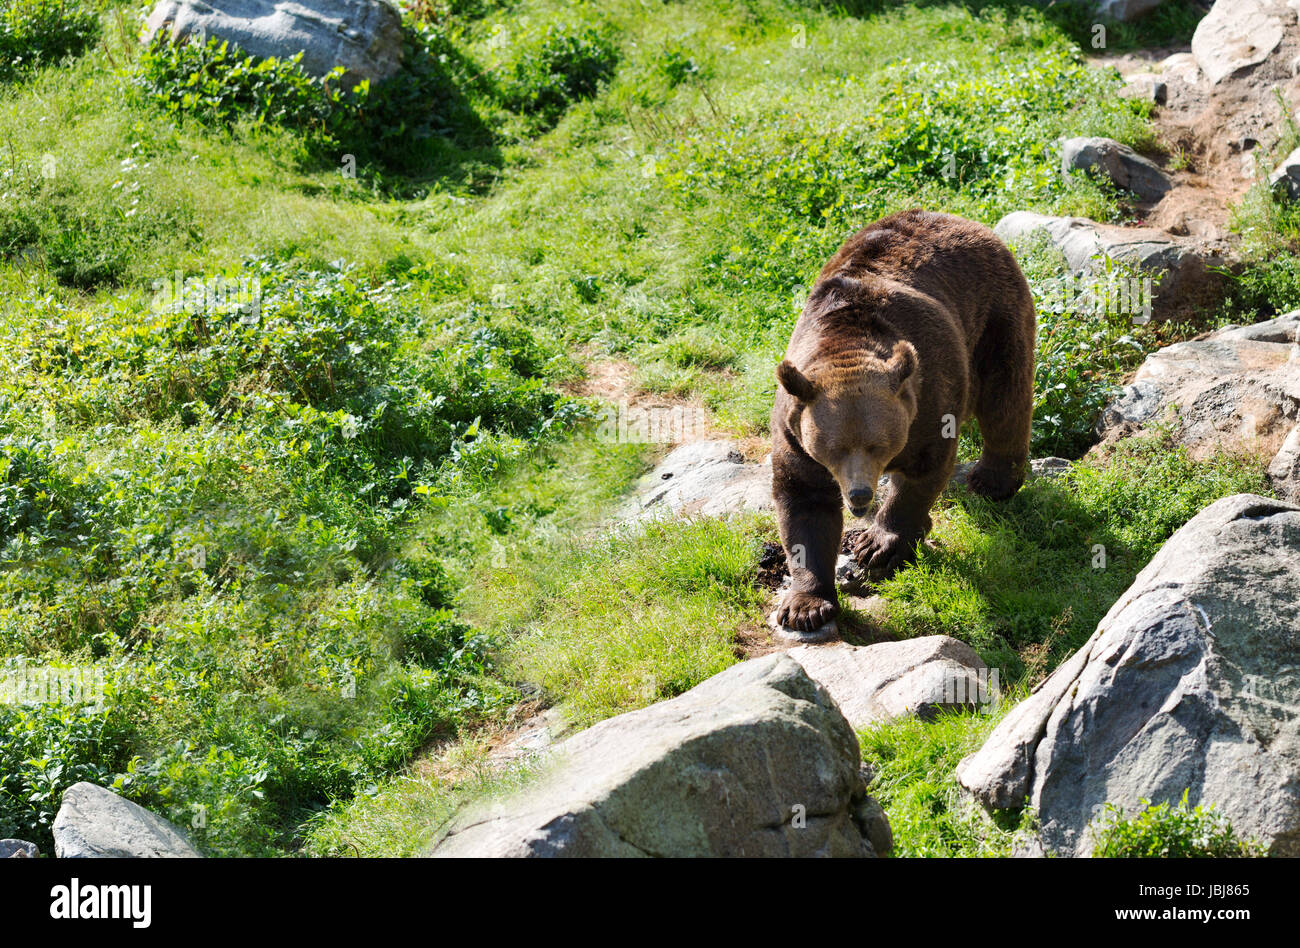 Europena Brown bear walking in the forests of Finalnd Stock Photo